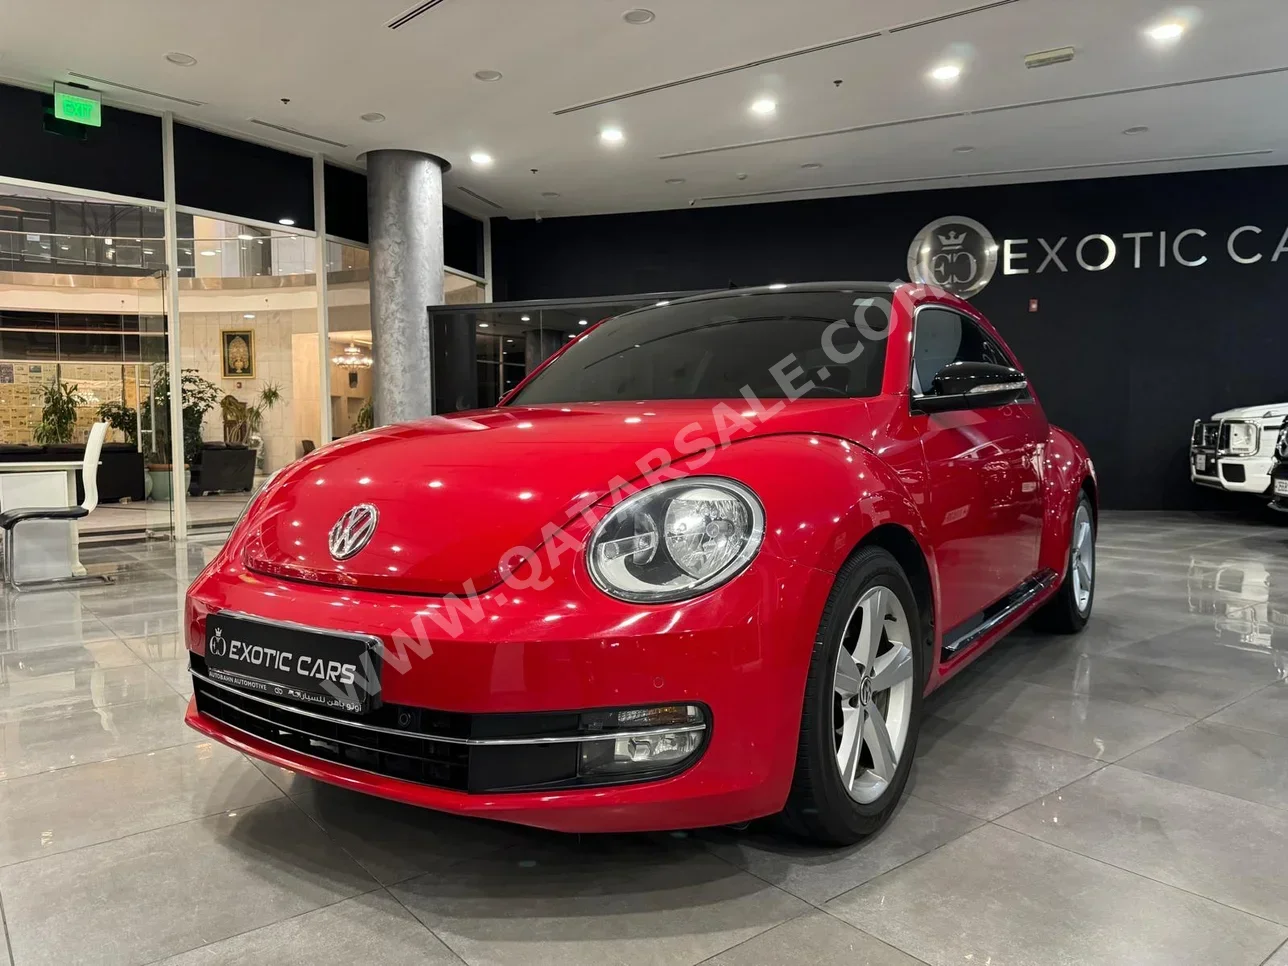 Volkswagen  Beetle  Turbo  2015  Automatic  76,000 Km  4 Cylinder  Rear Wheel Drive (RWD)  Hatchback  Red